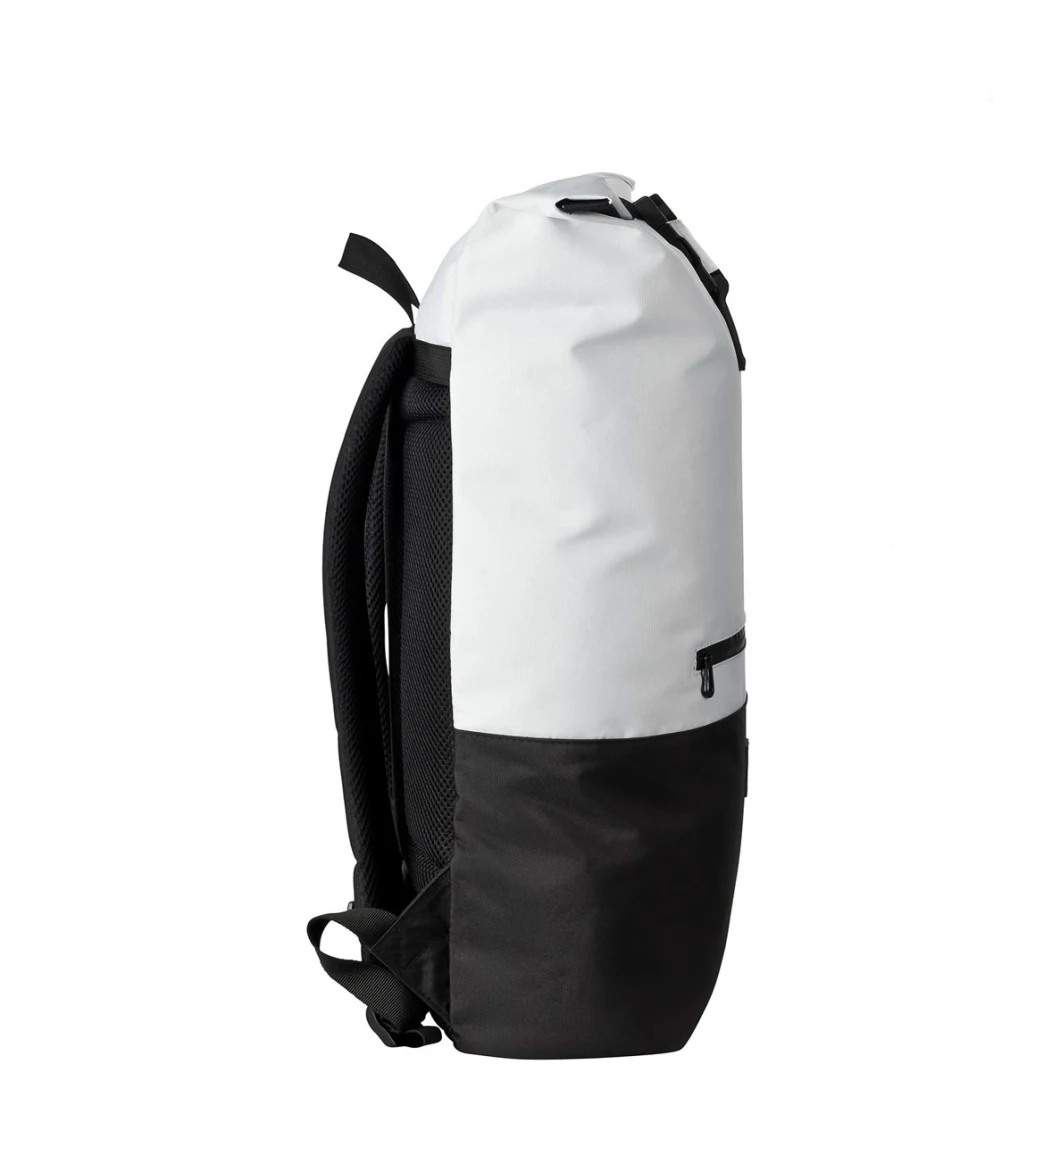 New Fashion Lightweight Roll-Top Backpack 35L Casual Rucksack Lifestyle Rolling Backpack Bag